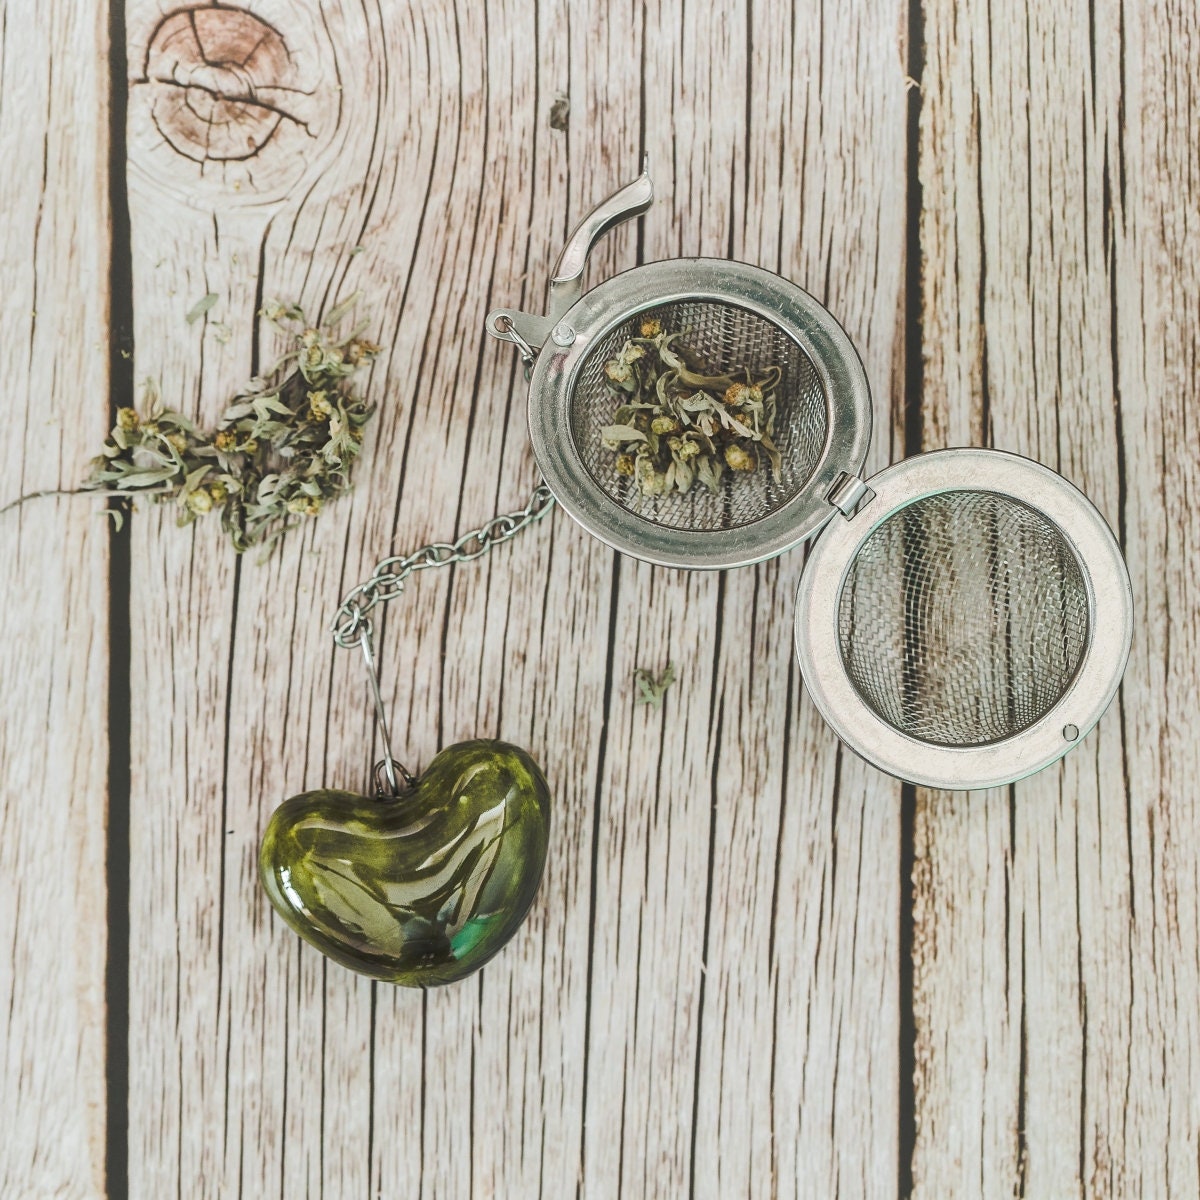 Loose leaf tea infuser with moss green heart - Loose tea strainer with ceramic heart - Herbal tea ball infuser with charm